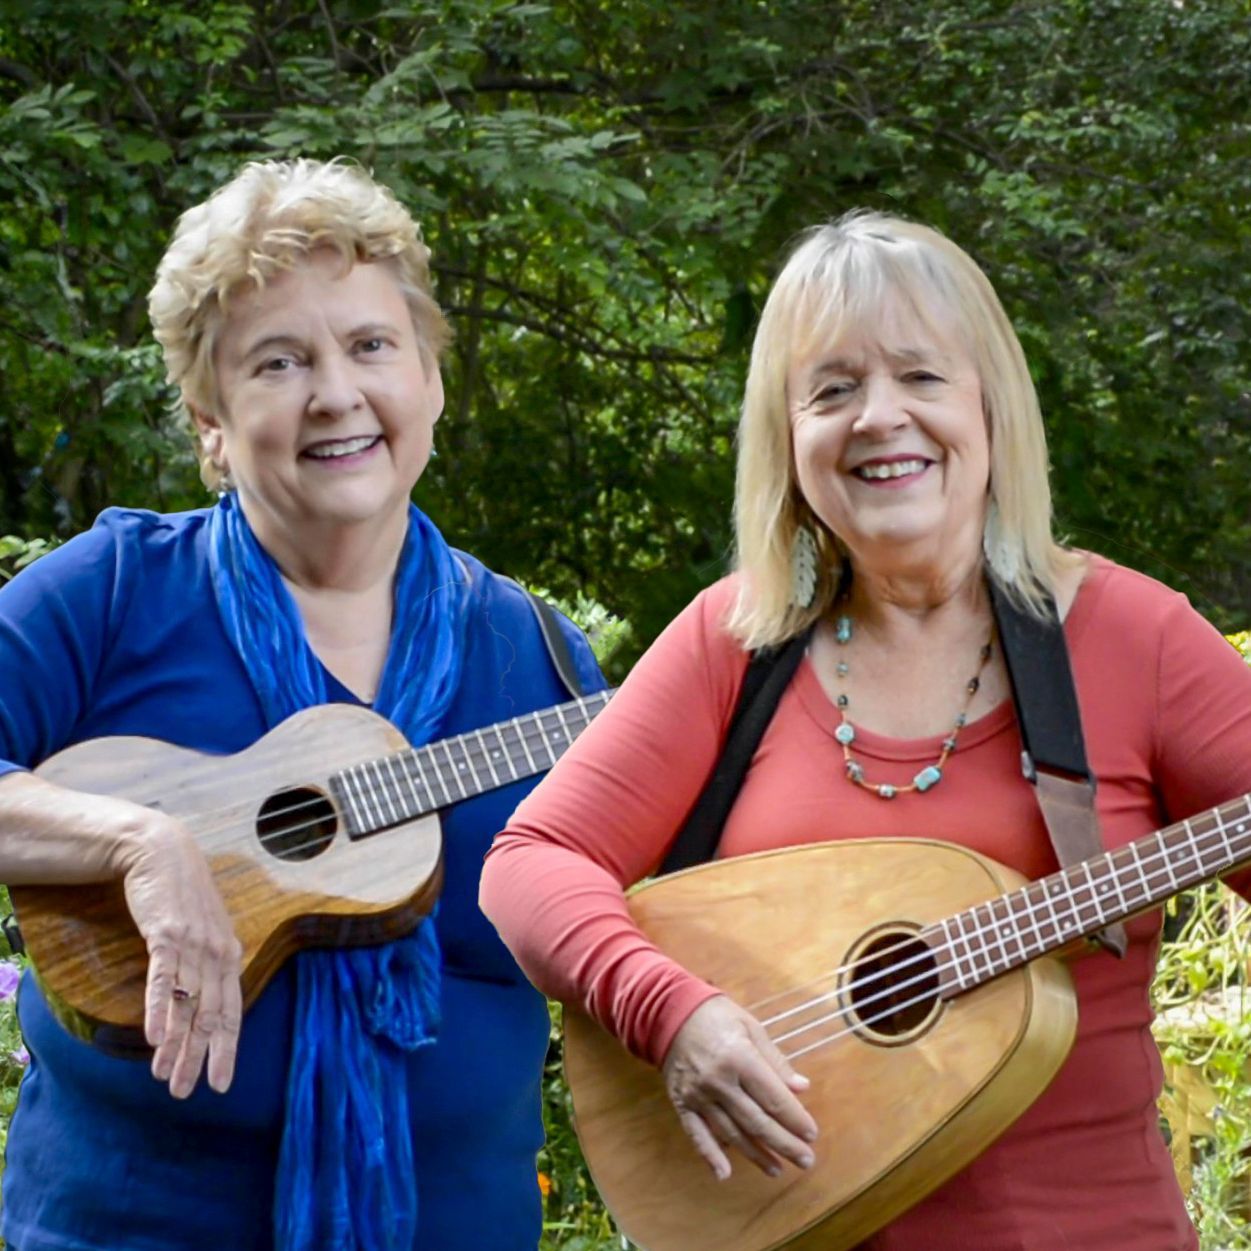 two women standing next to each other playing ukuleles and smiling